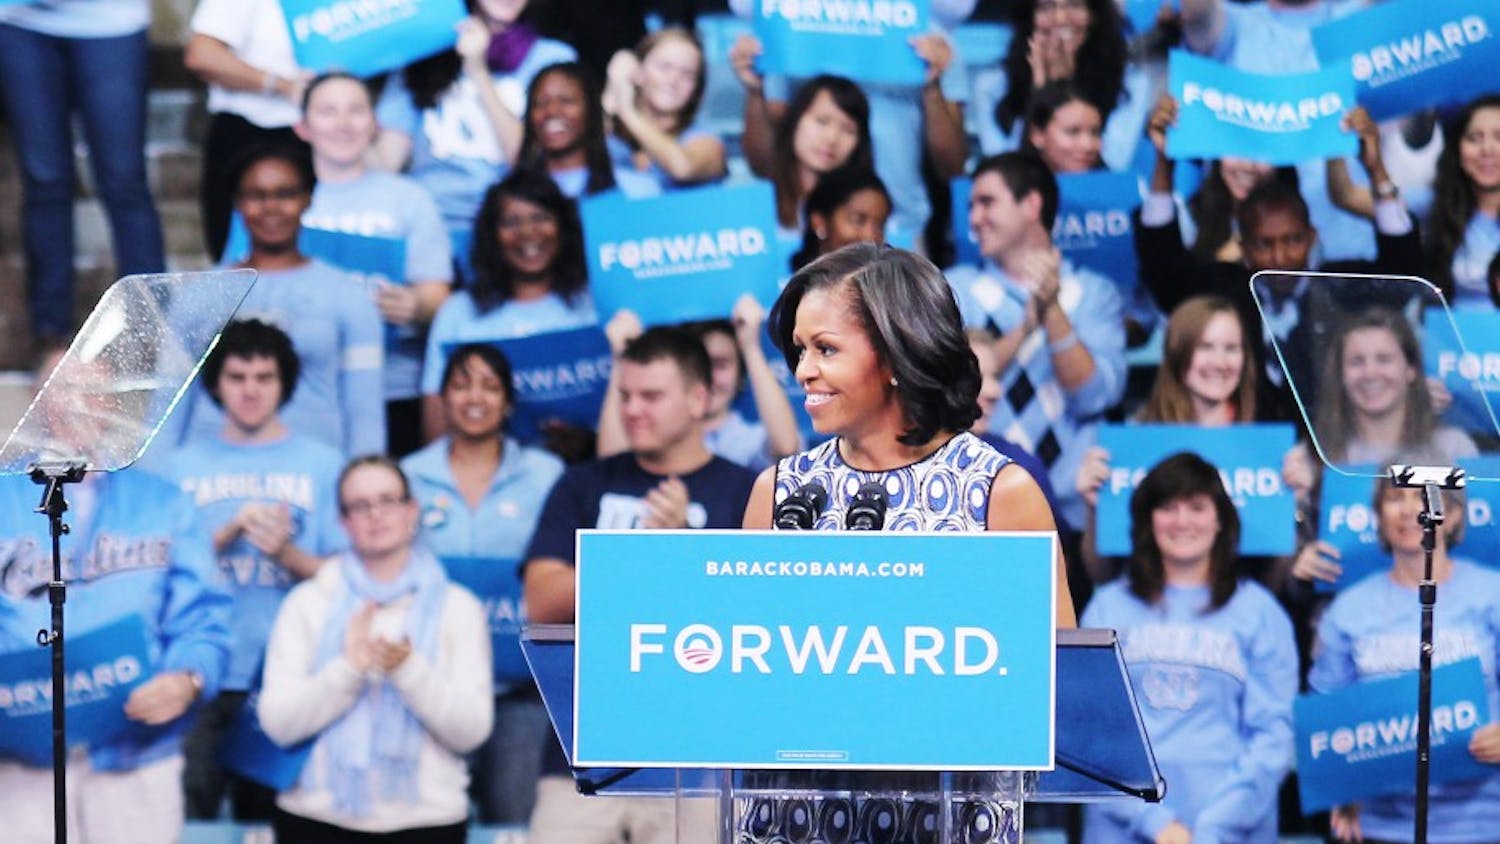 Michelle Obama spoke to students and grassroots supporters in Carmichael Arena on Tuesday afternoon.